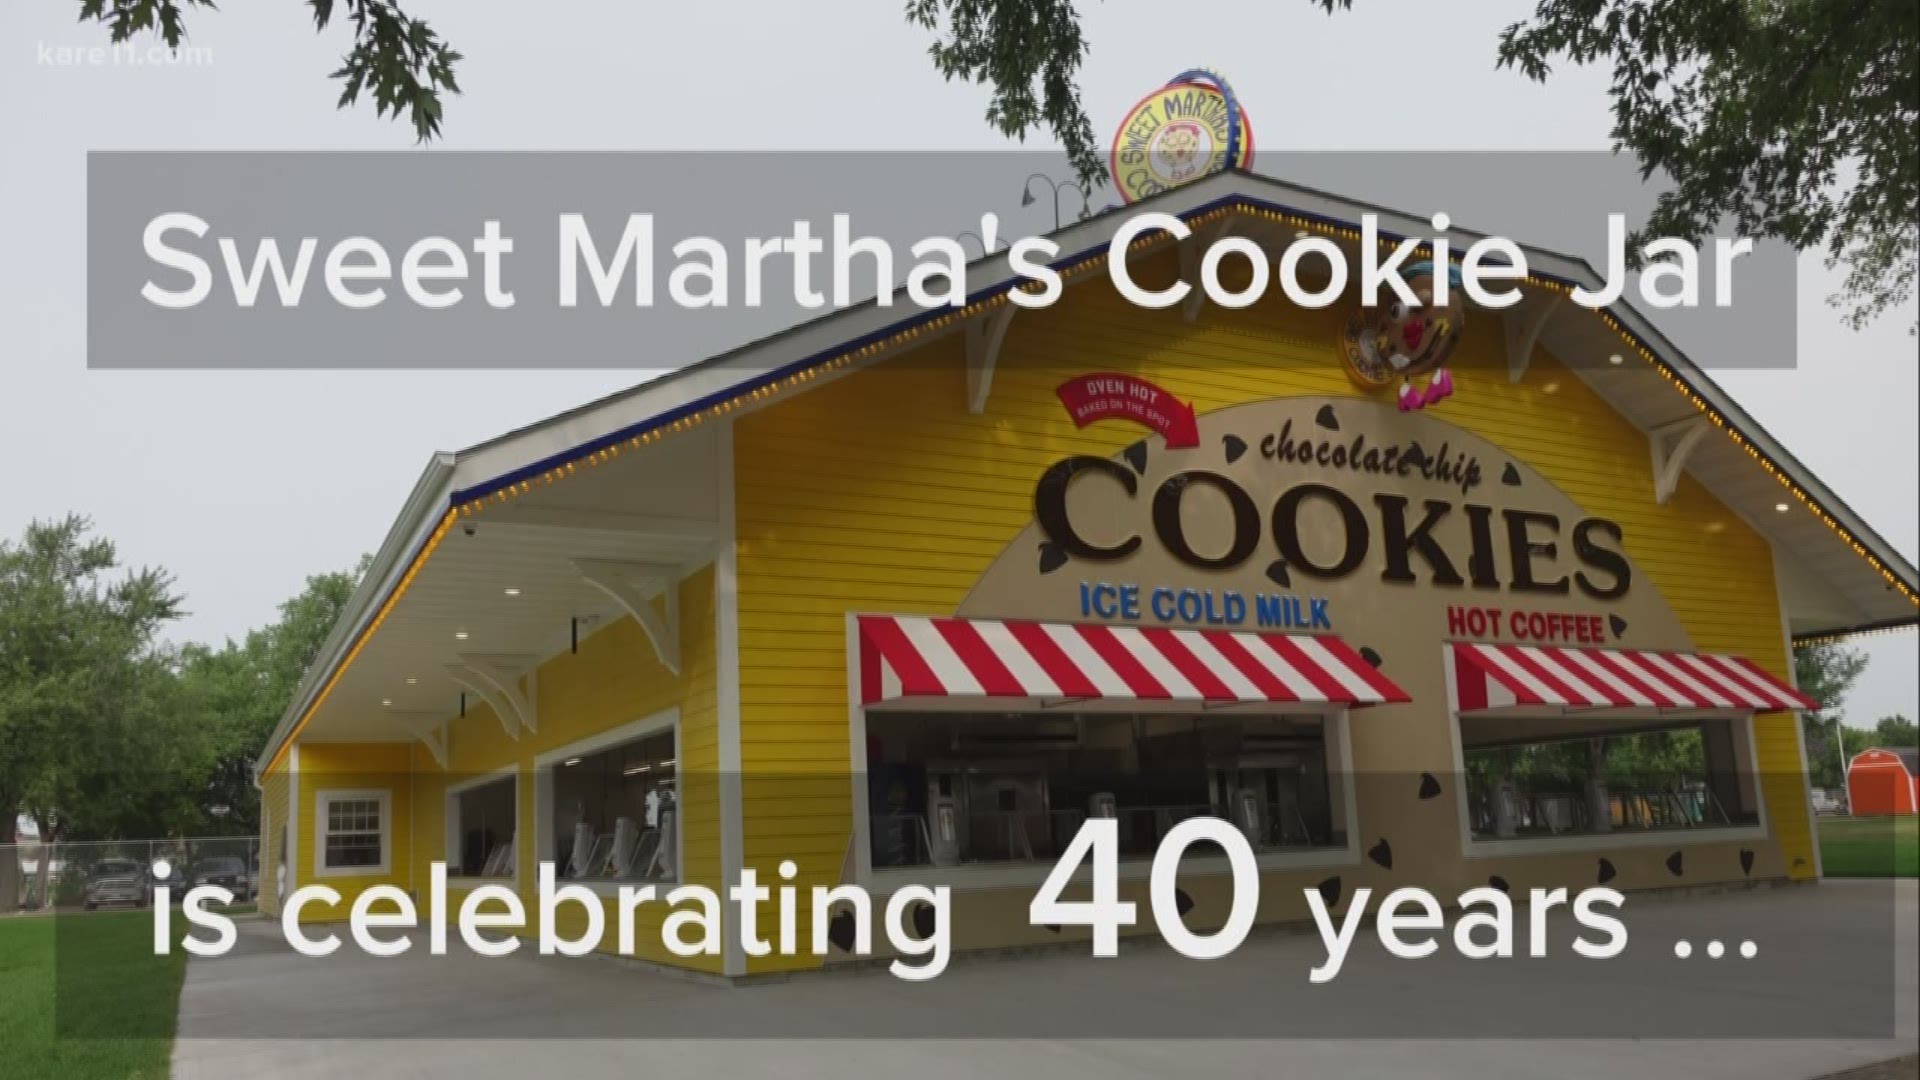 Sweet Martha's Cookie Jar is celebrating 40 years with a brand new location on Machinery Hill!